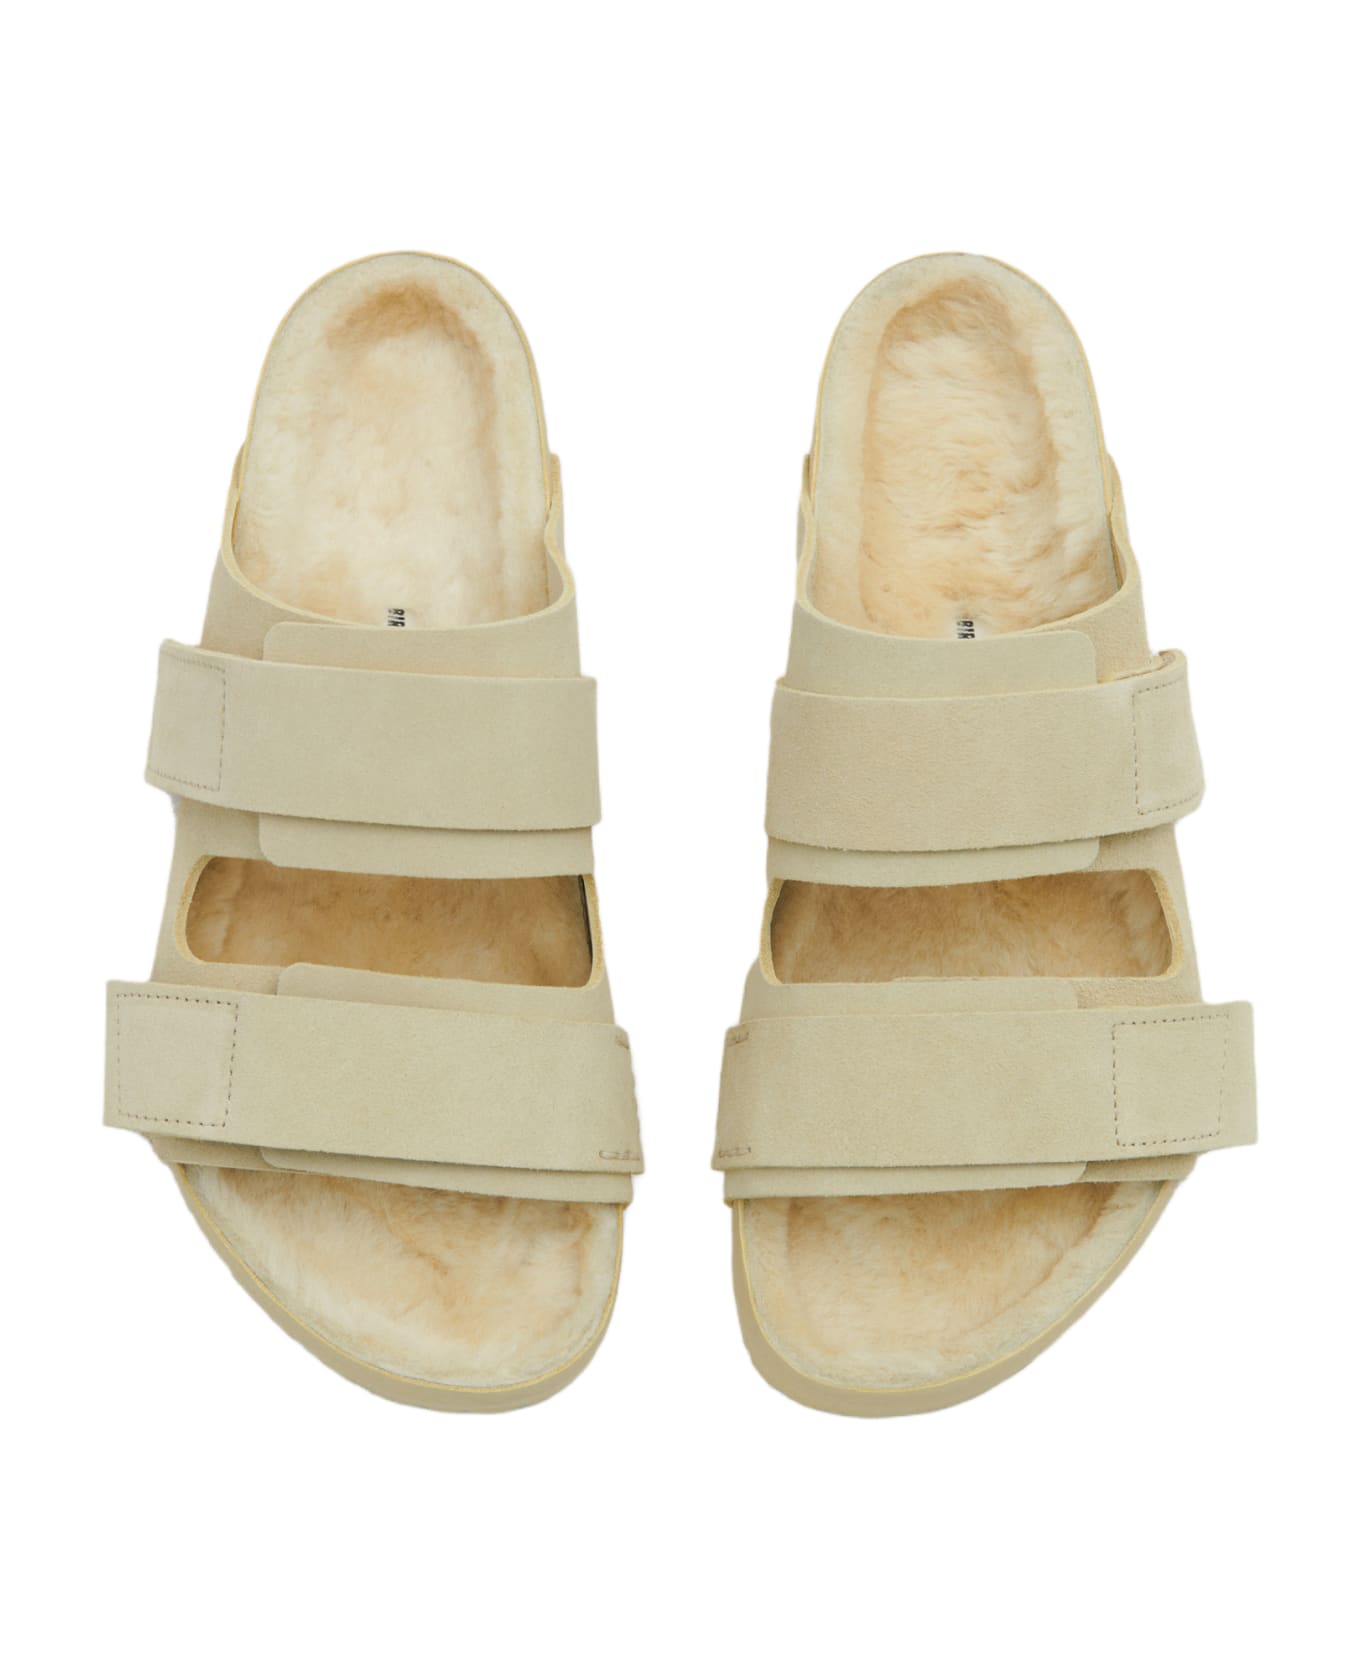 Birkenstock Uji Suede And Leather Slippers - STRAW